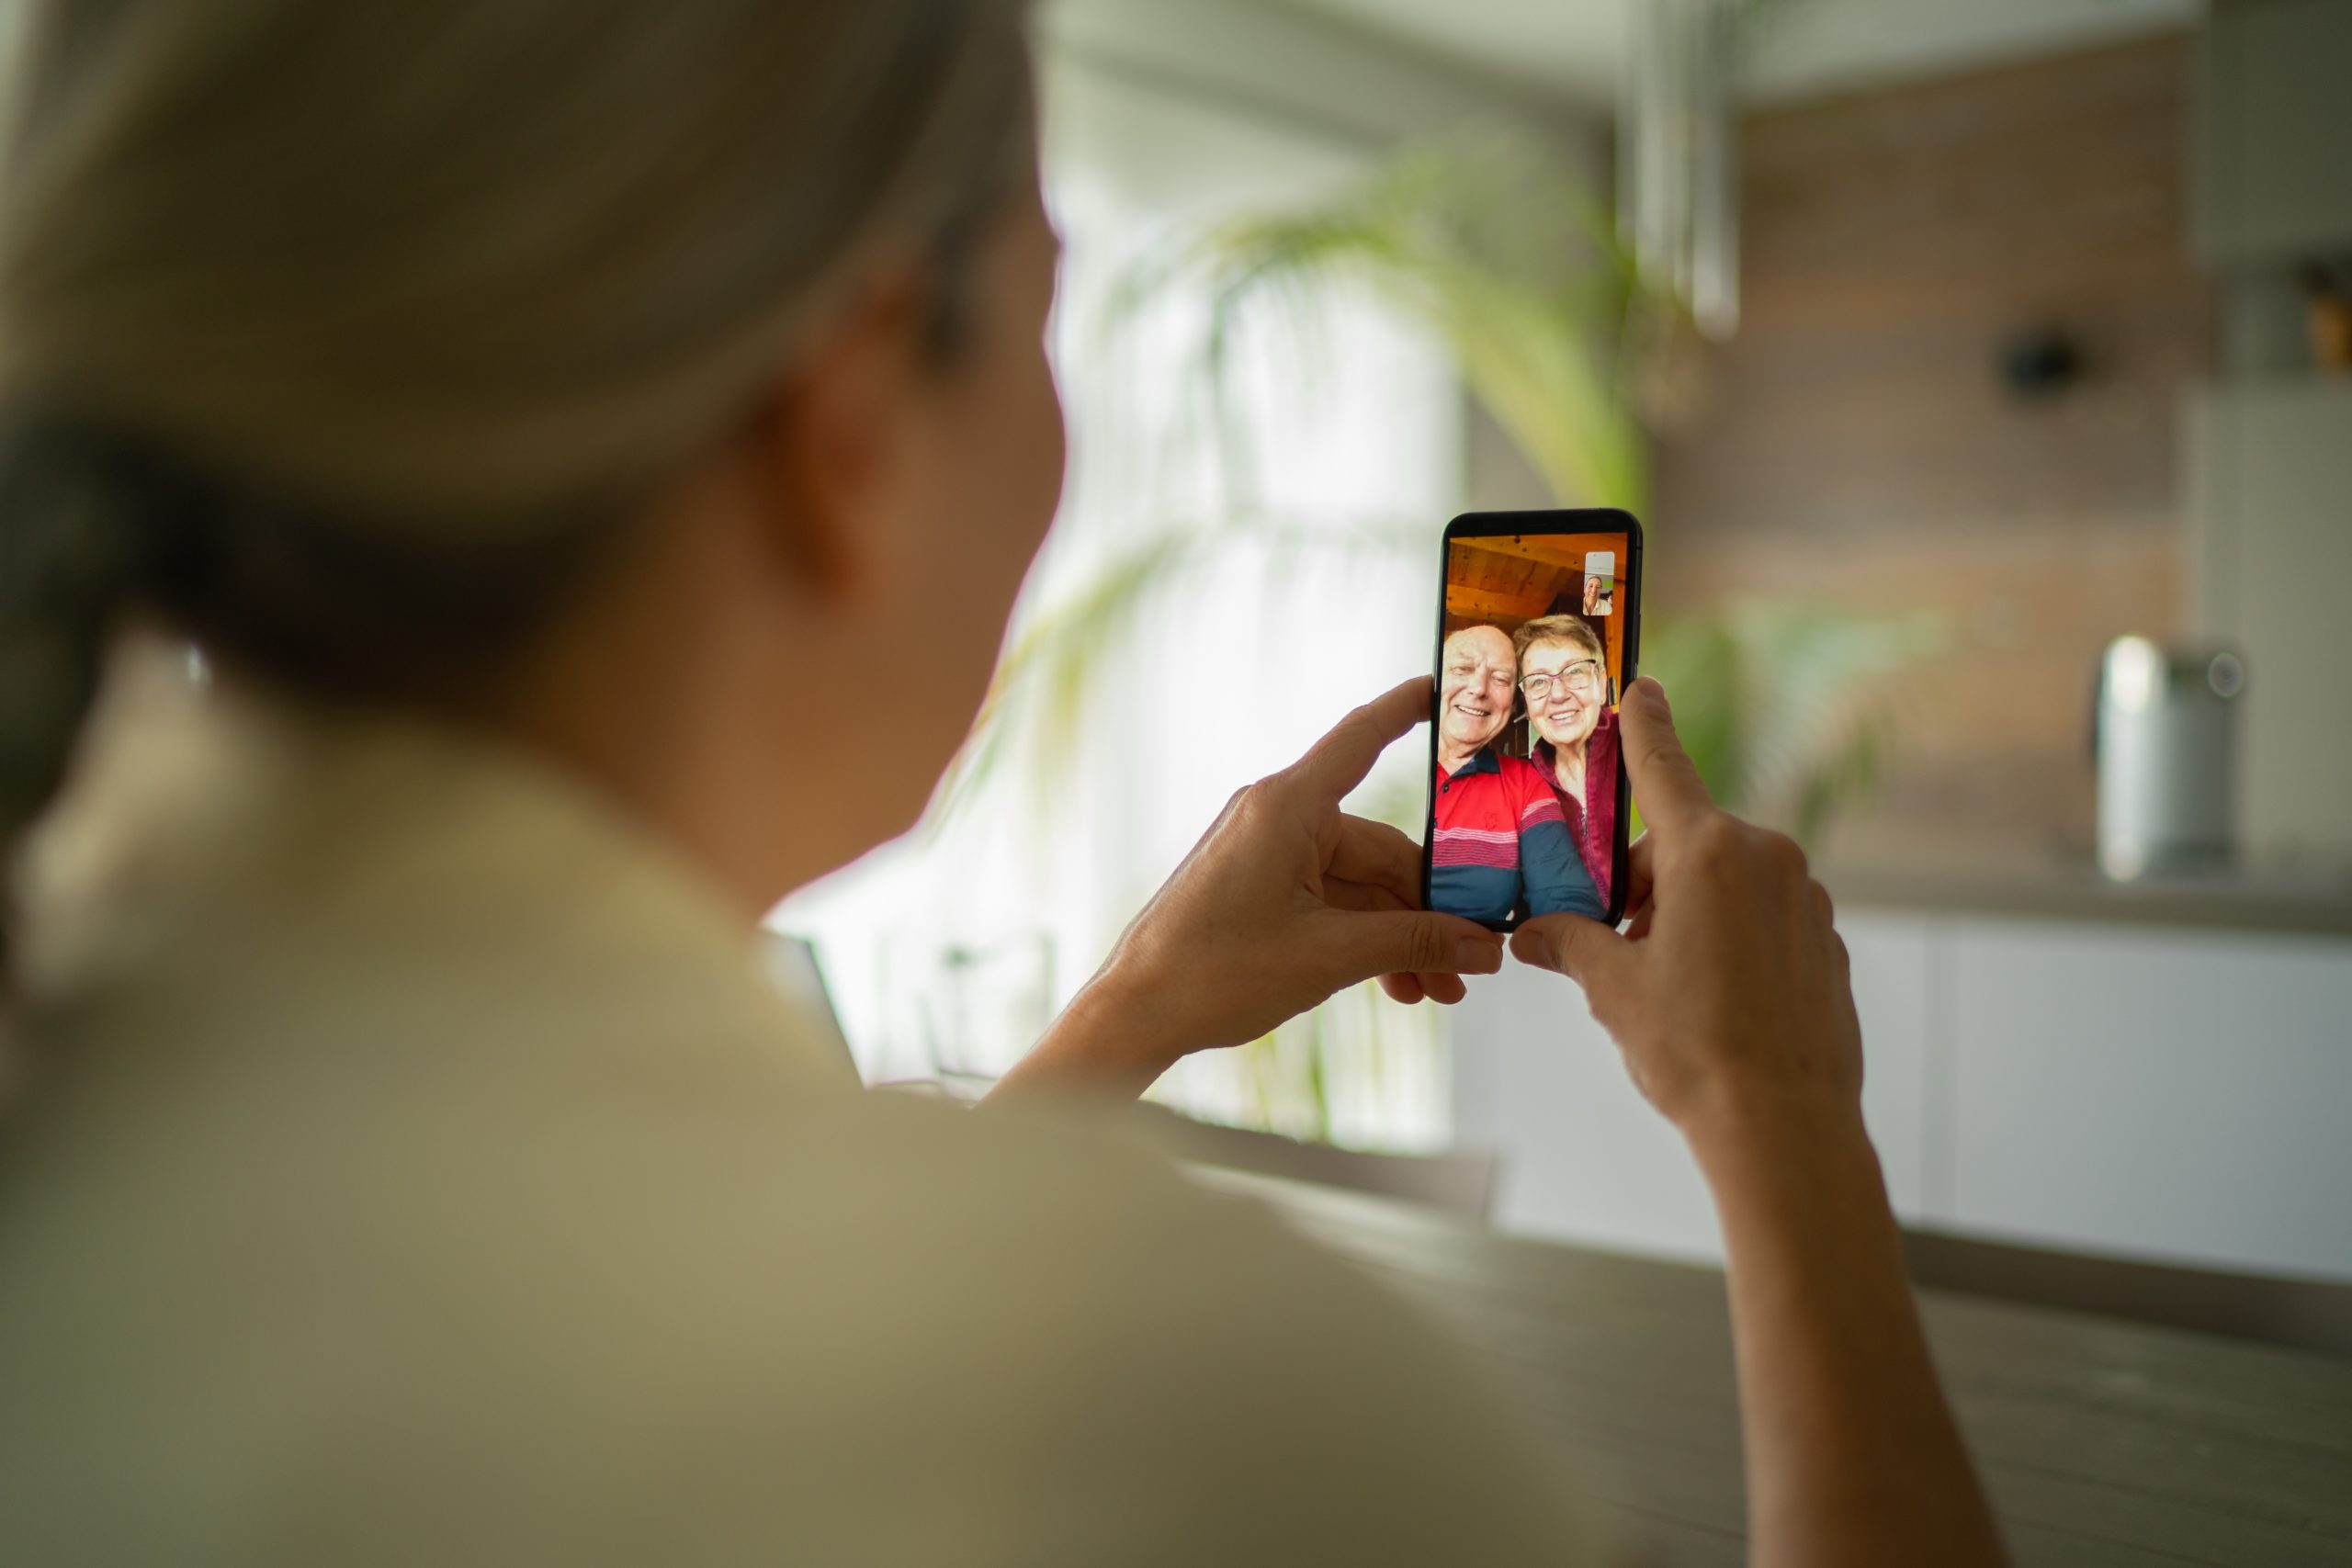 The best video call equipment for video chatting with friends and family |